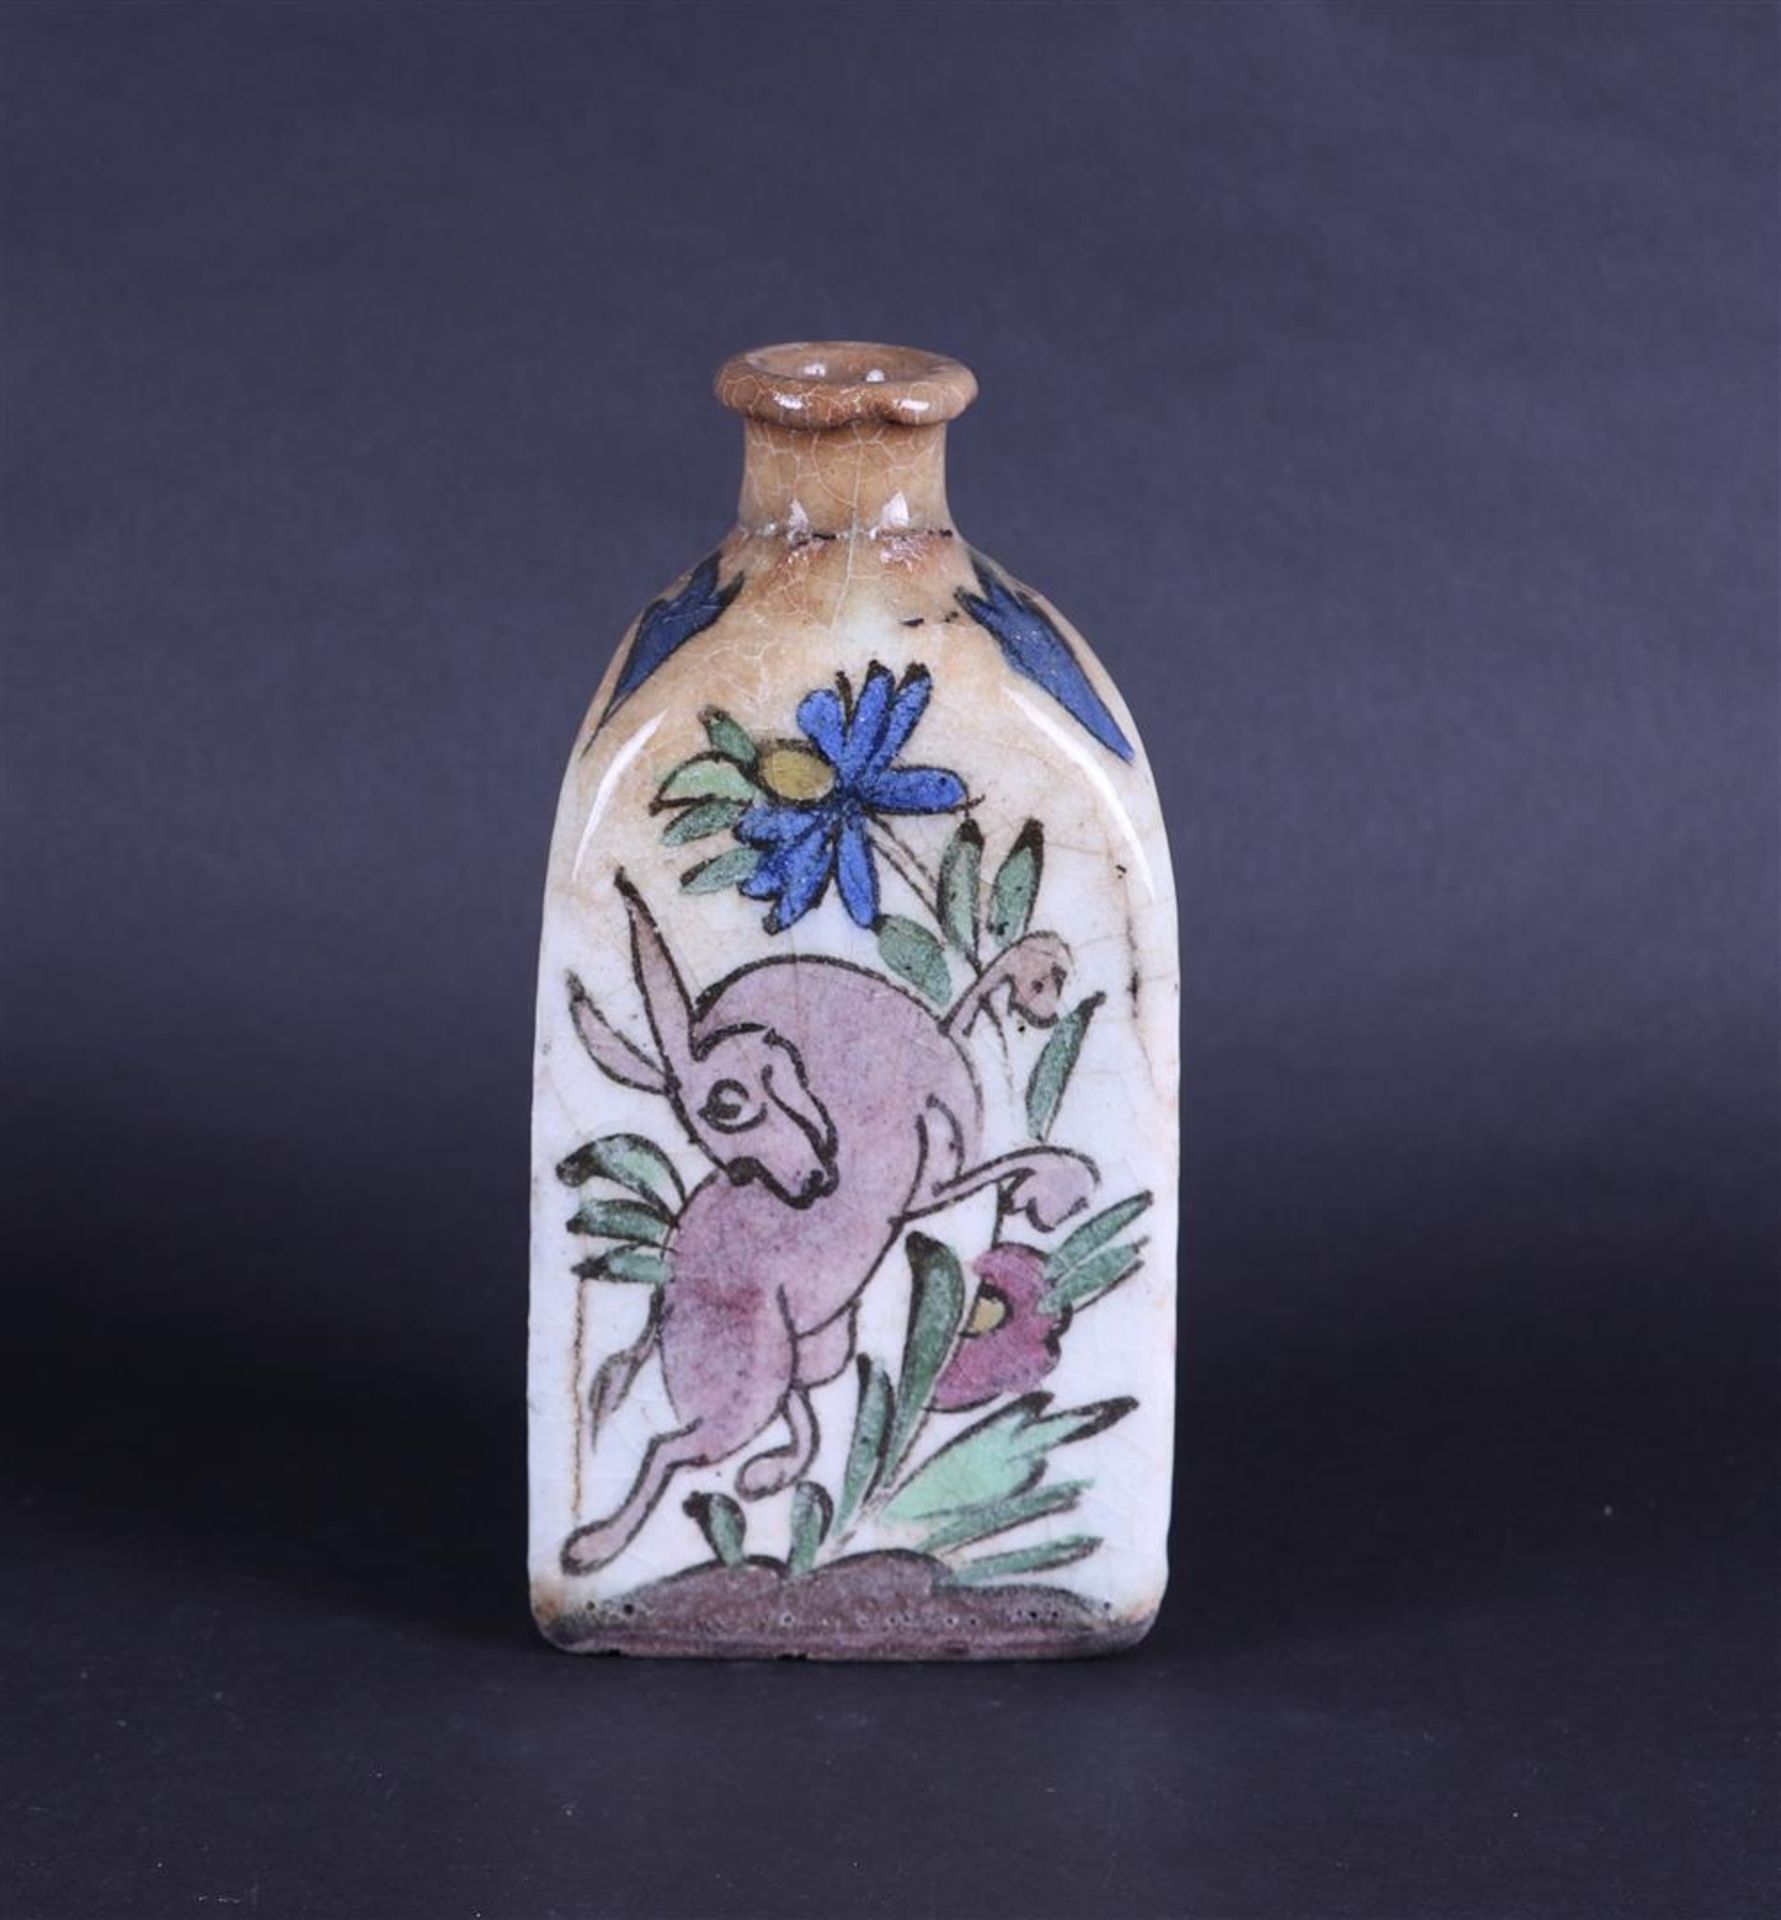 A Qajar pottery bottle decorated with decor of animals and plants. Persia, 19th century. - Image 3 of 4